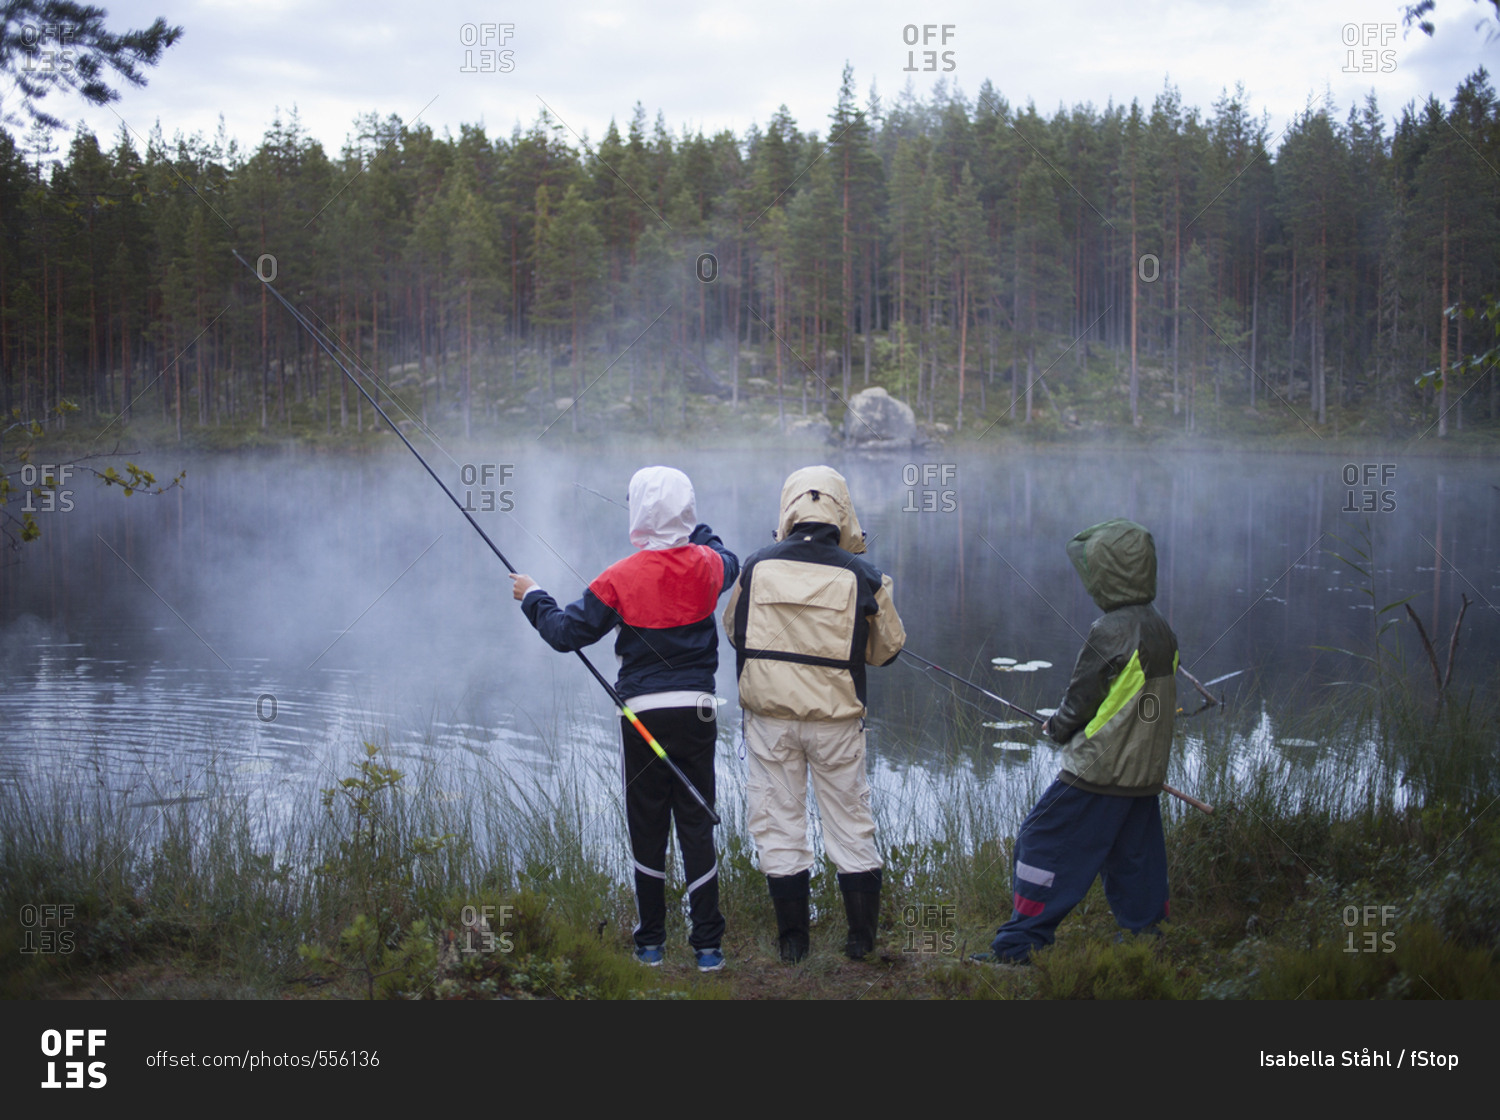 Rear view of children wearing raincoats fishing at lake in foggy weather